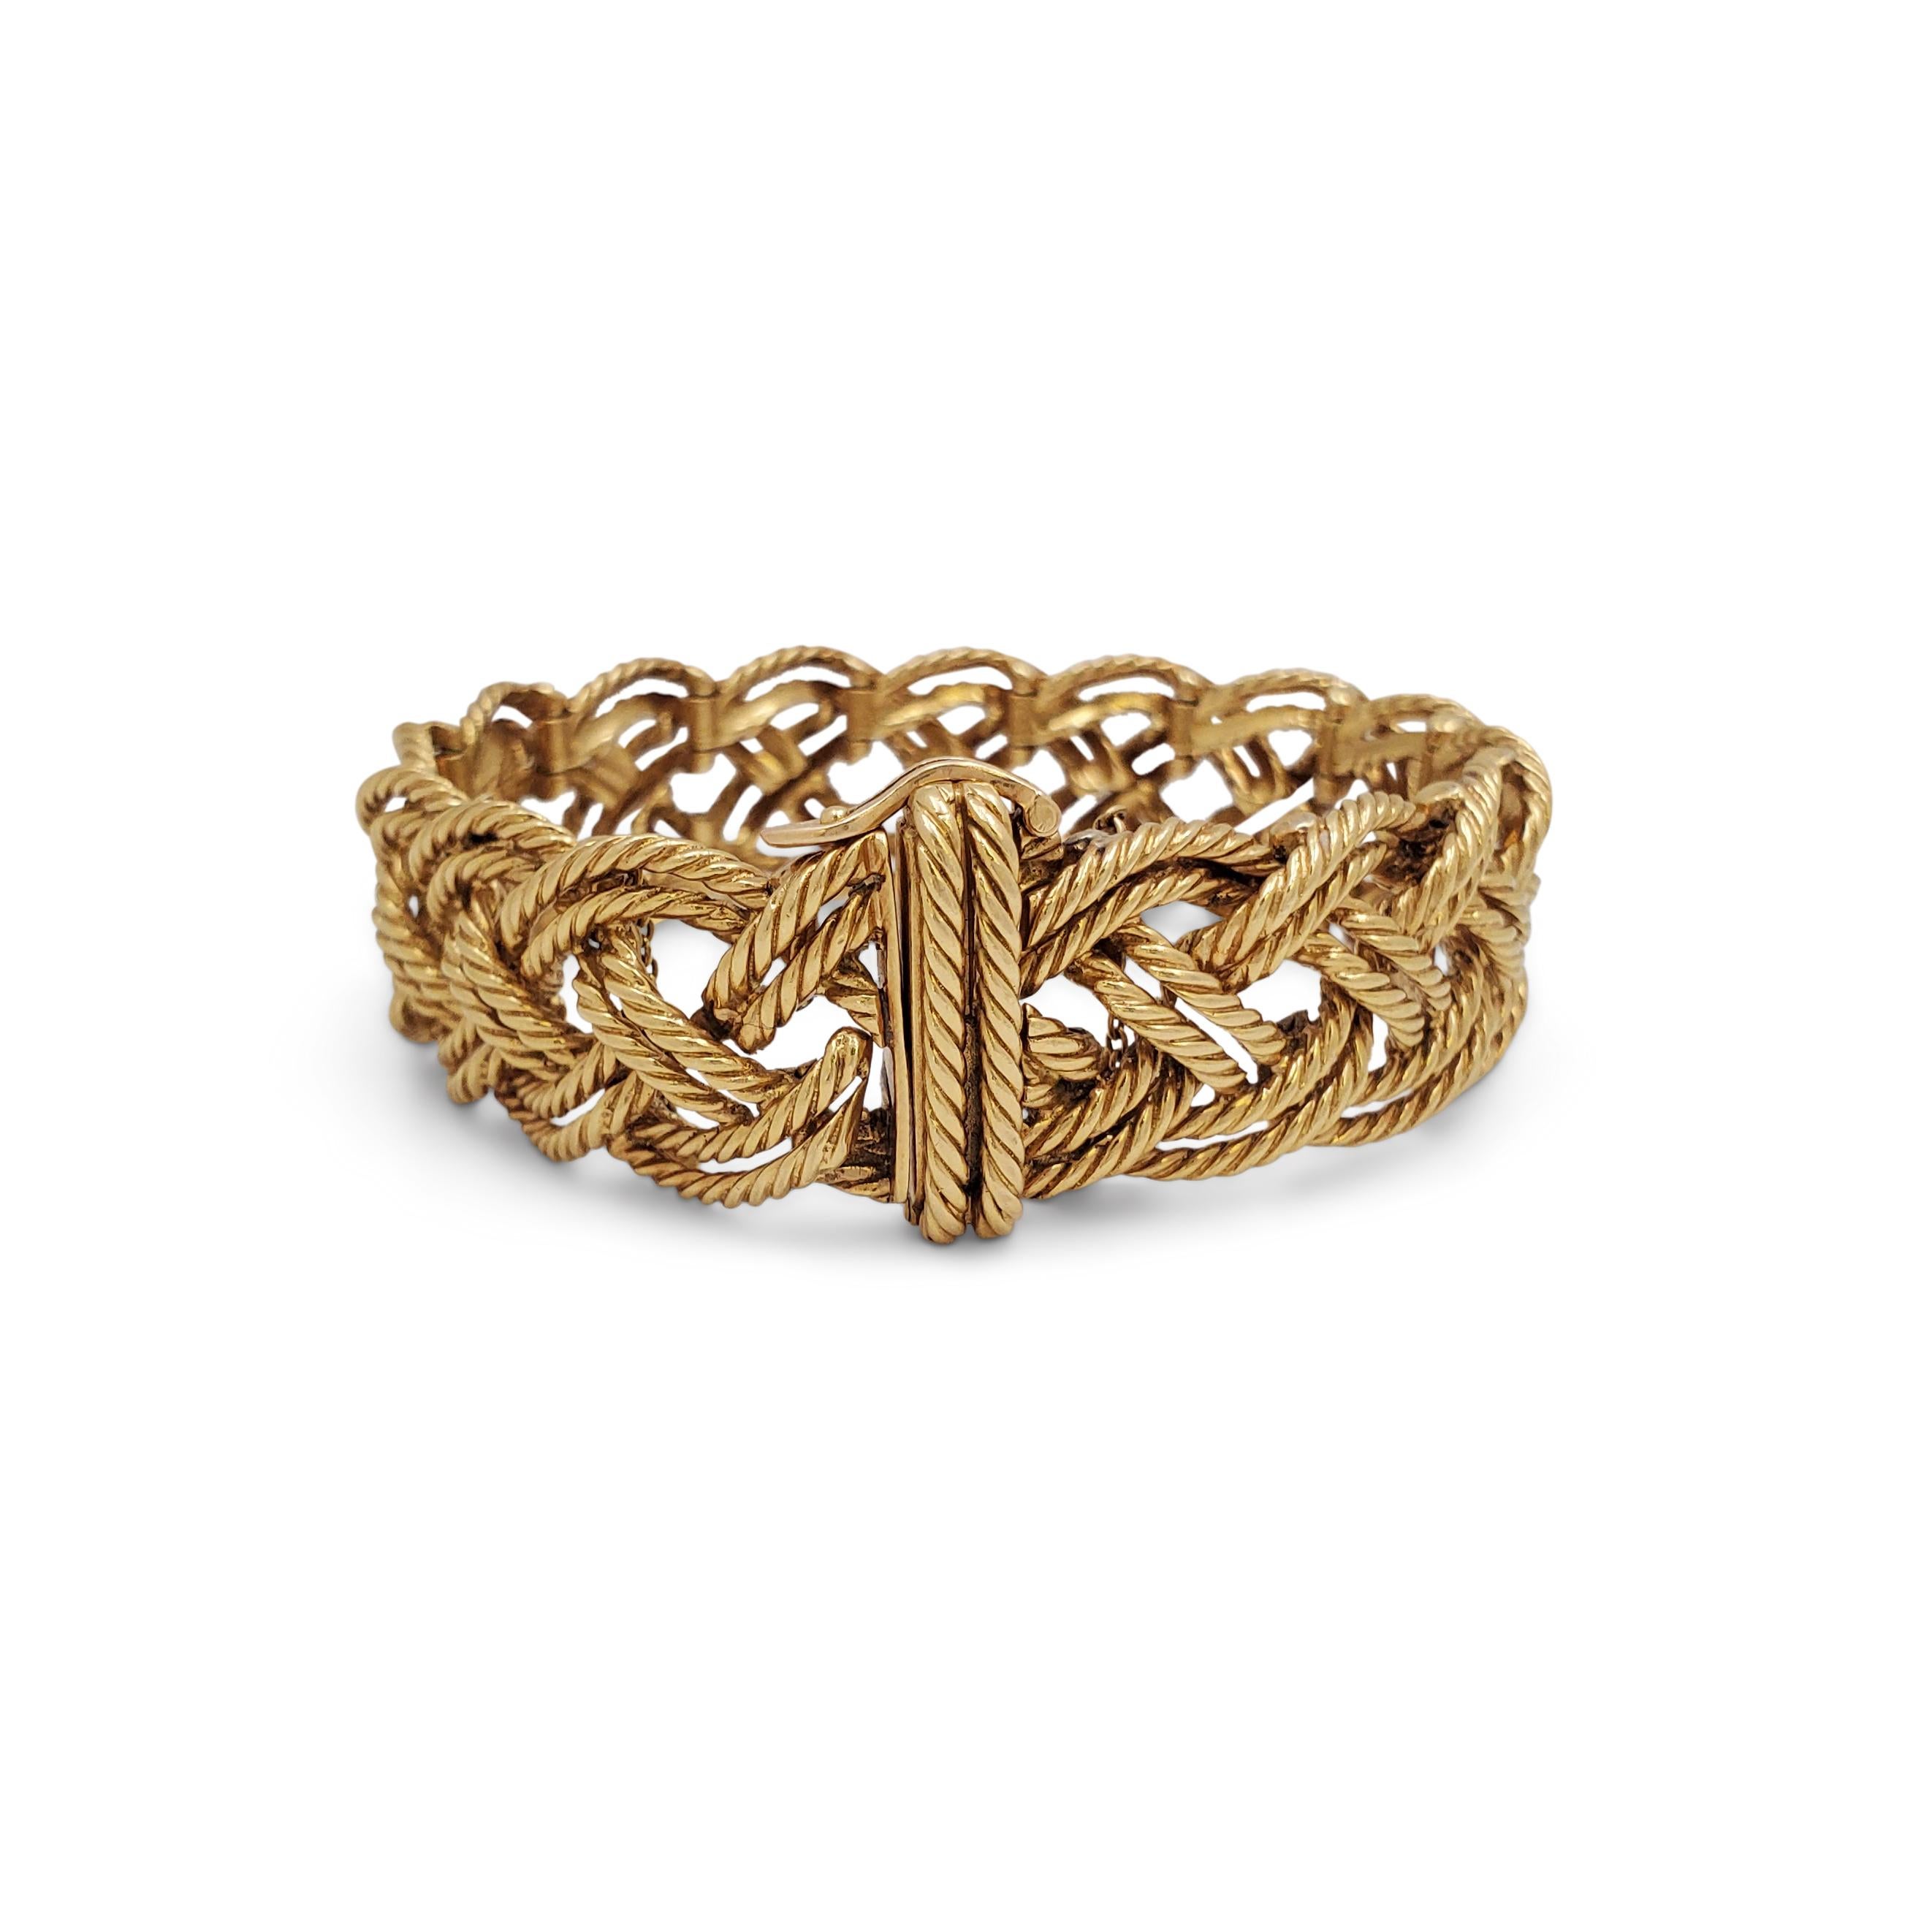 Authentic vintage Boucheron bracelet crafted in 18 karat gold.  Comprised of rope-textured links intricately woven into a braided pattern, the bracelet measures 6 1/2 inches in length.  Signed Boucheron Paris with French hallmarks.  Bracelet is not